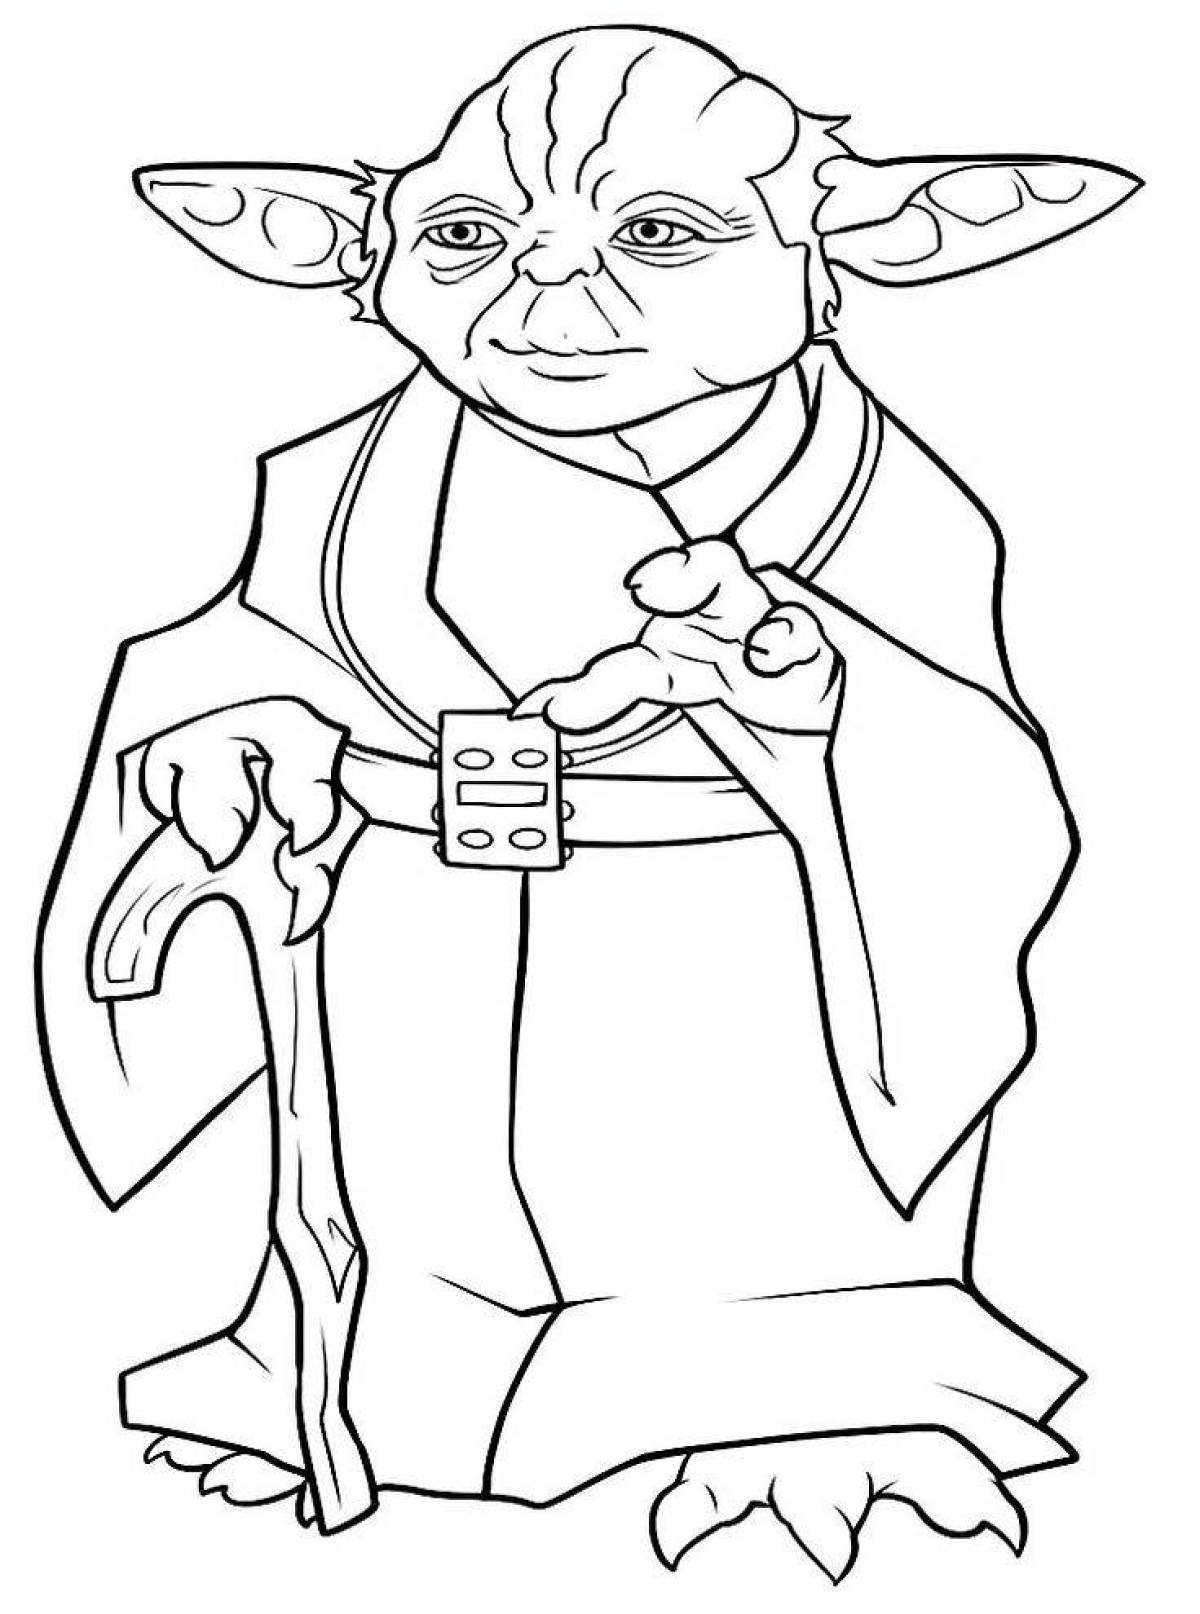 Yoda's amazing coloring page